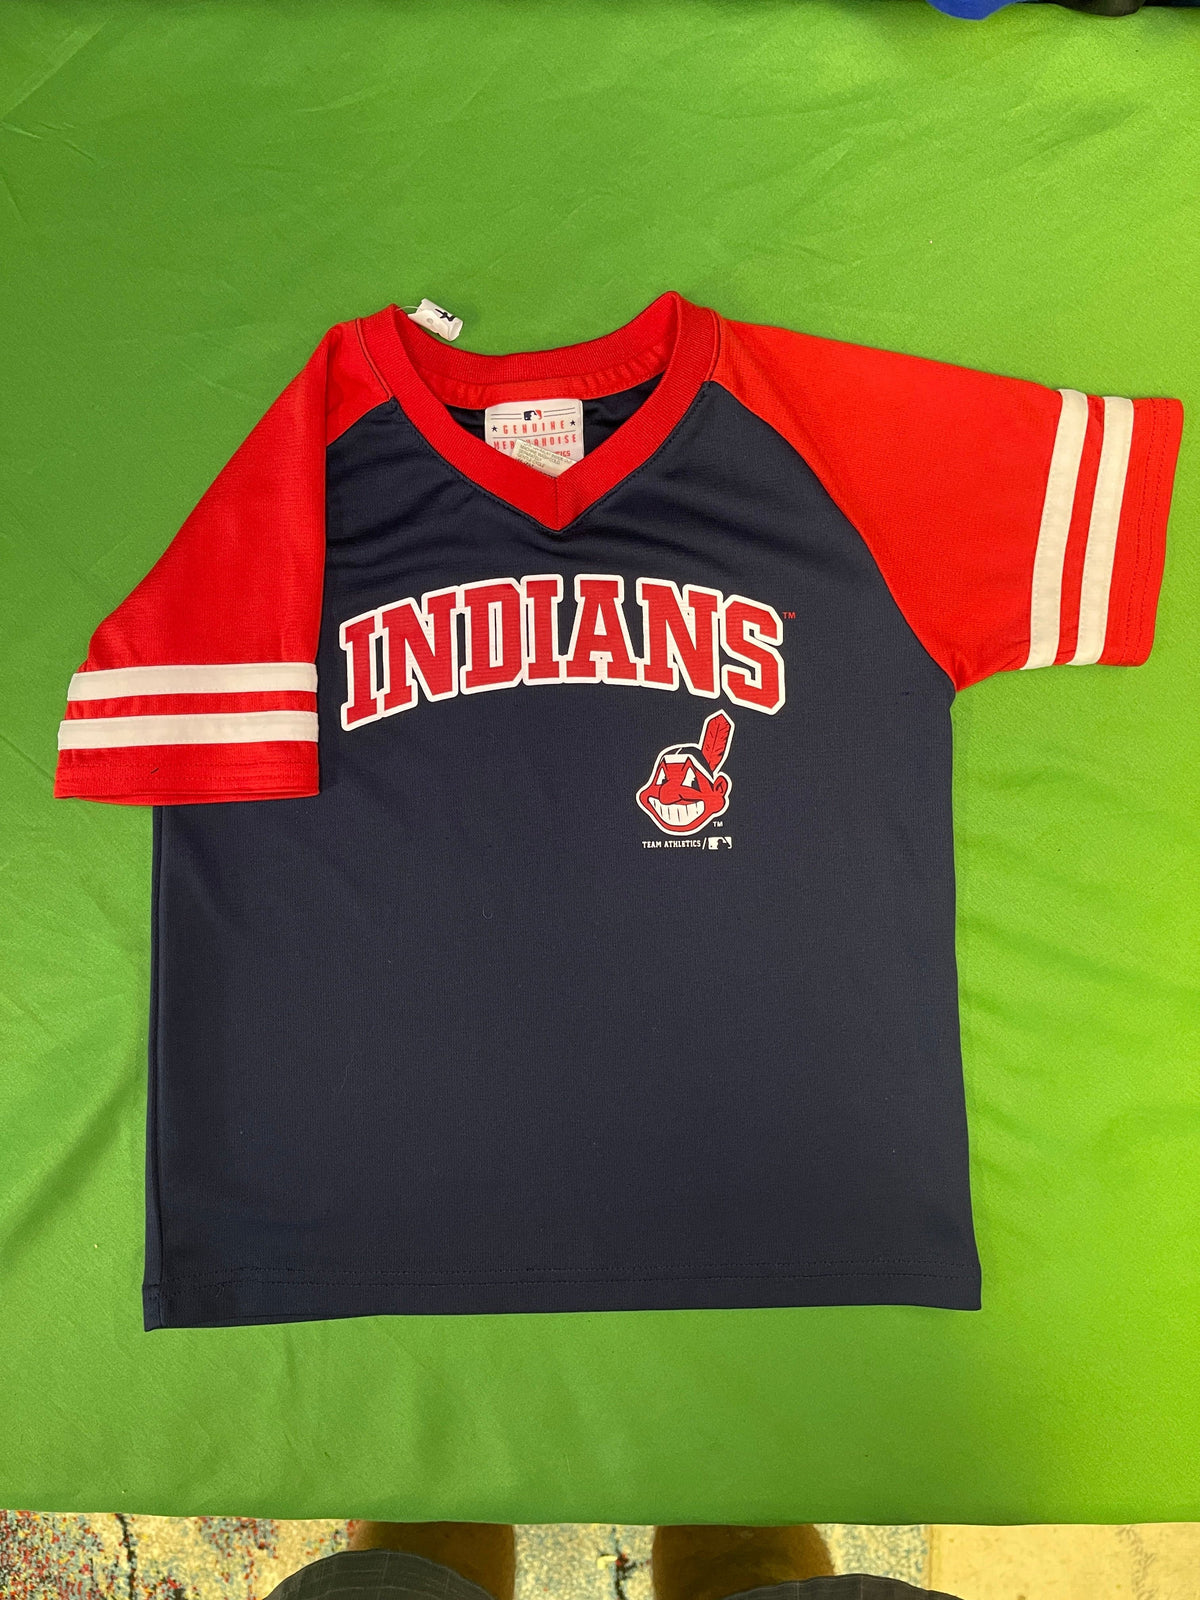 MLB Cleveland Guardians (Indians) Team Athletics Jersey-Style T-Shirt Youth X-Small 5-6